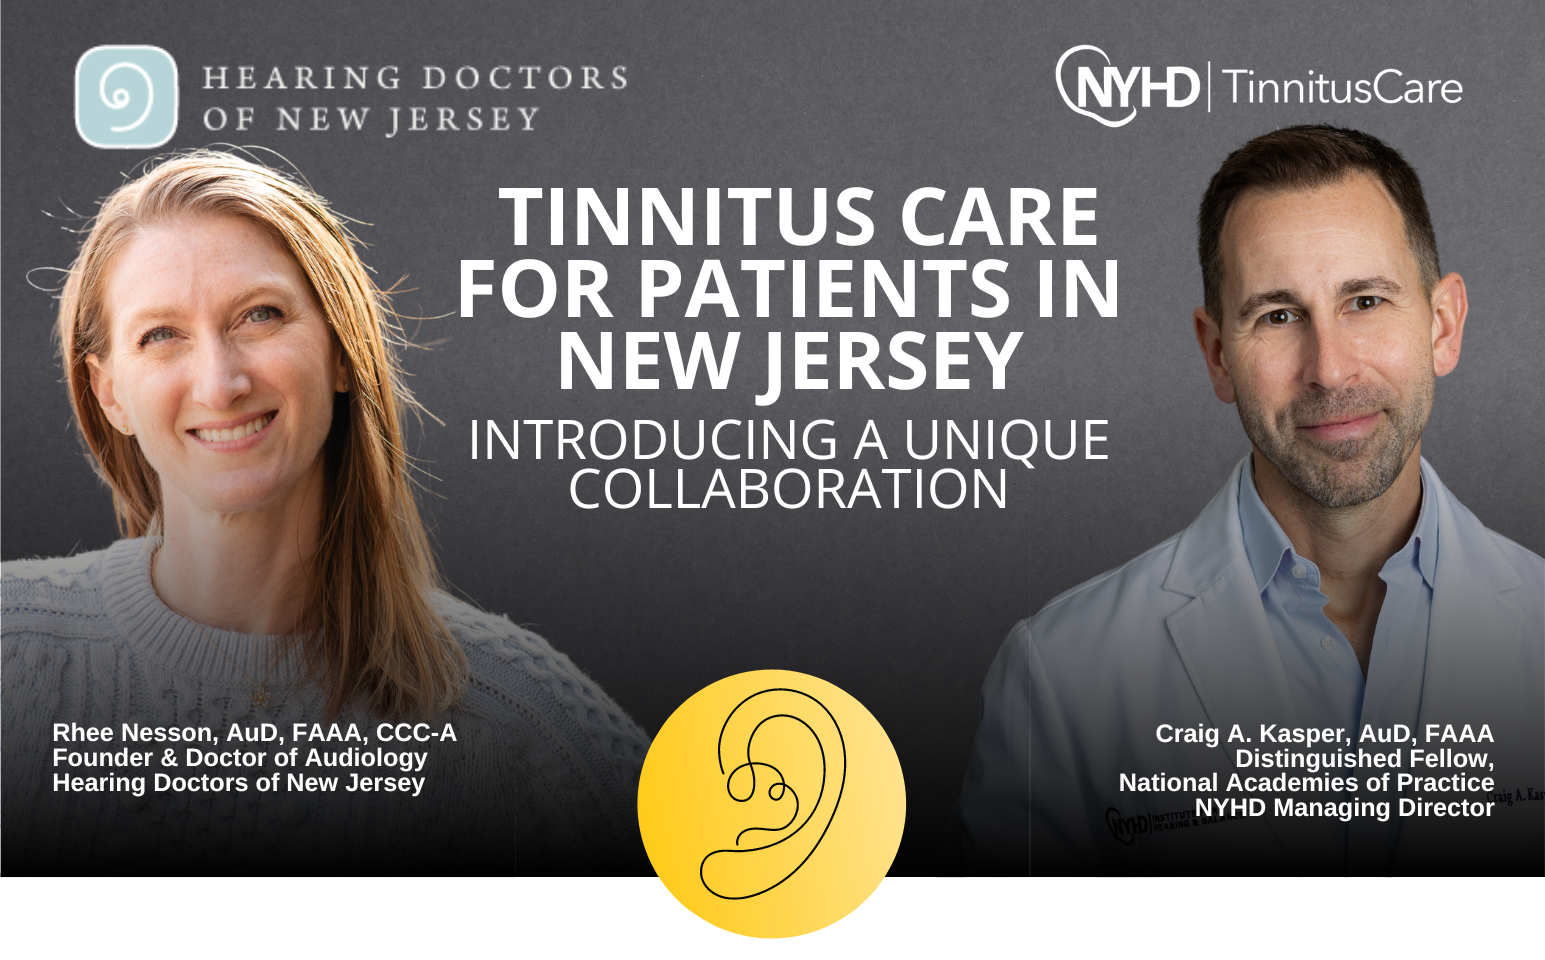 Our New Collaboration with Hearing Doctors of New Jersey!